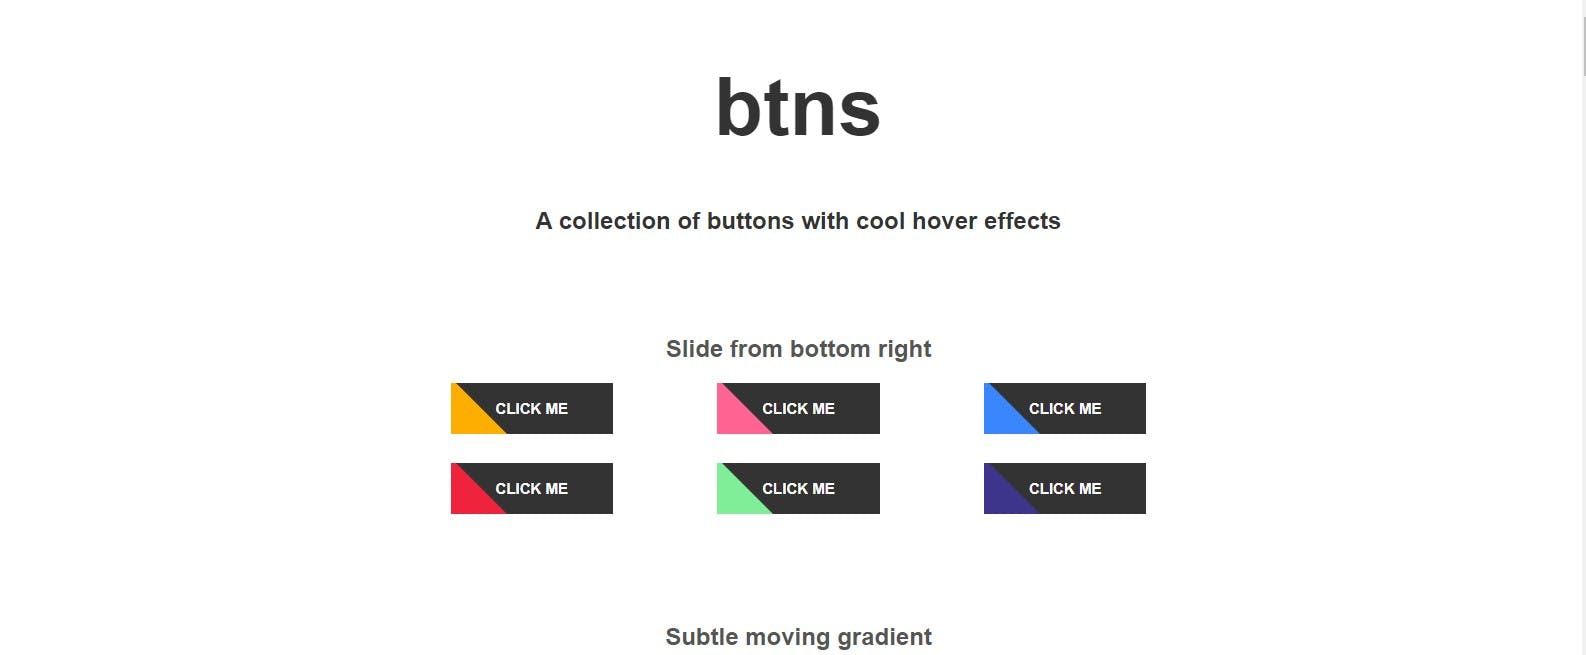 Btns — A collection of buttons with cool hover effects